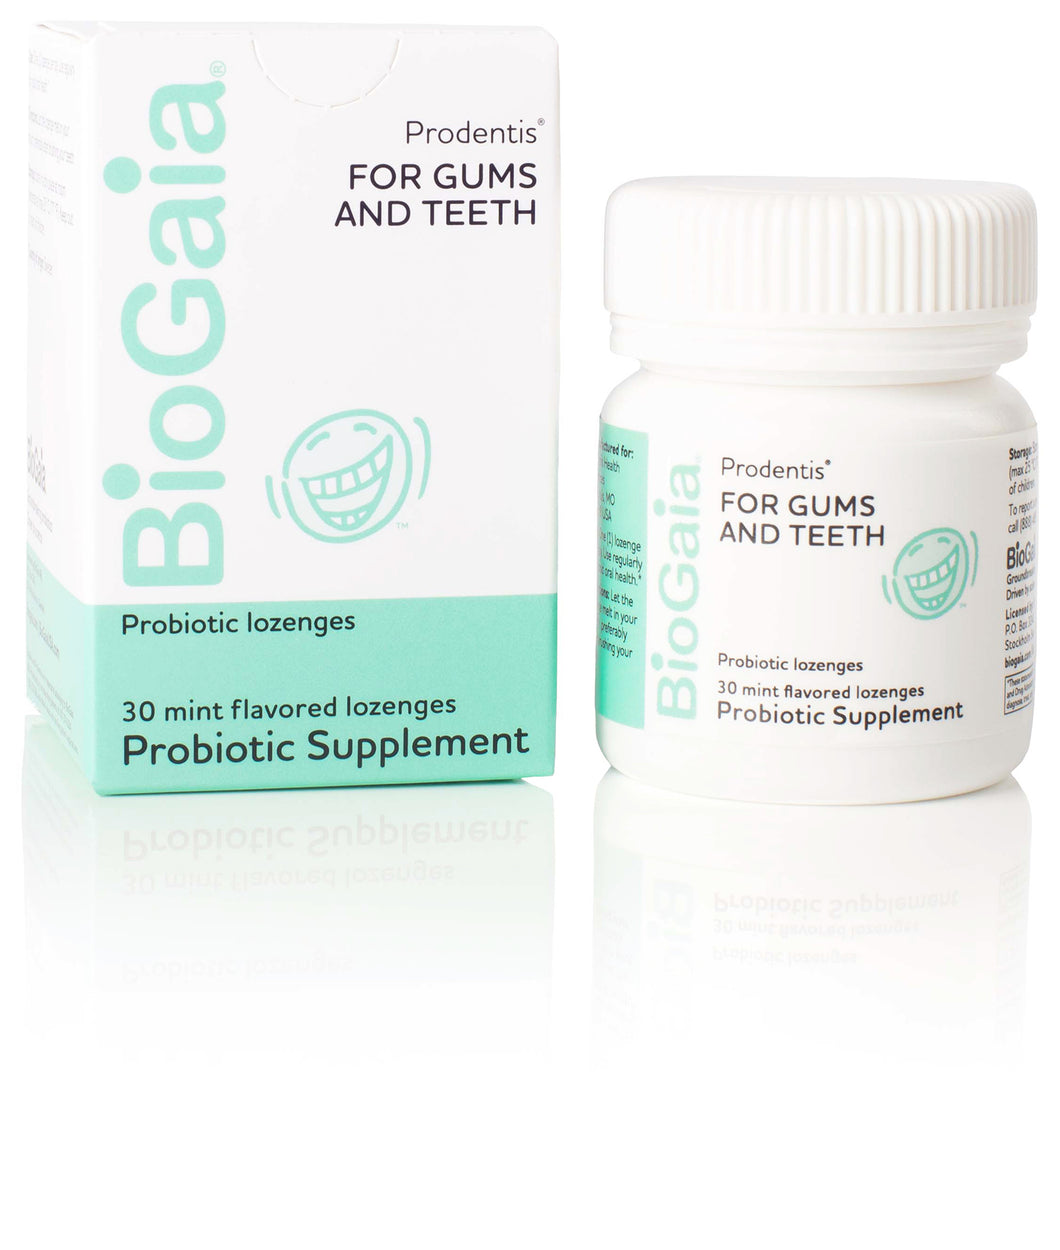 BioGaia Mint flavored Probiotic! the perfect combination for healthy gums and good breath!!